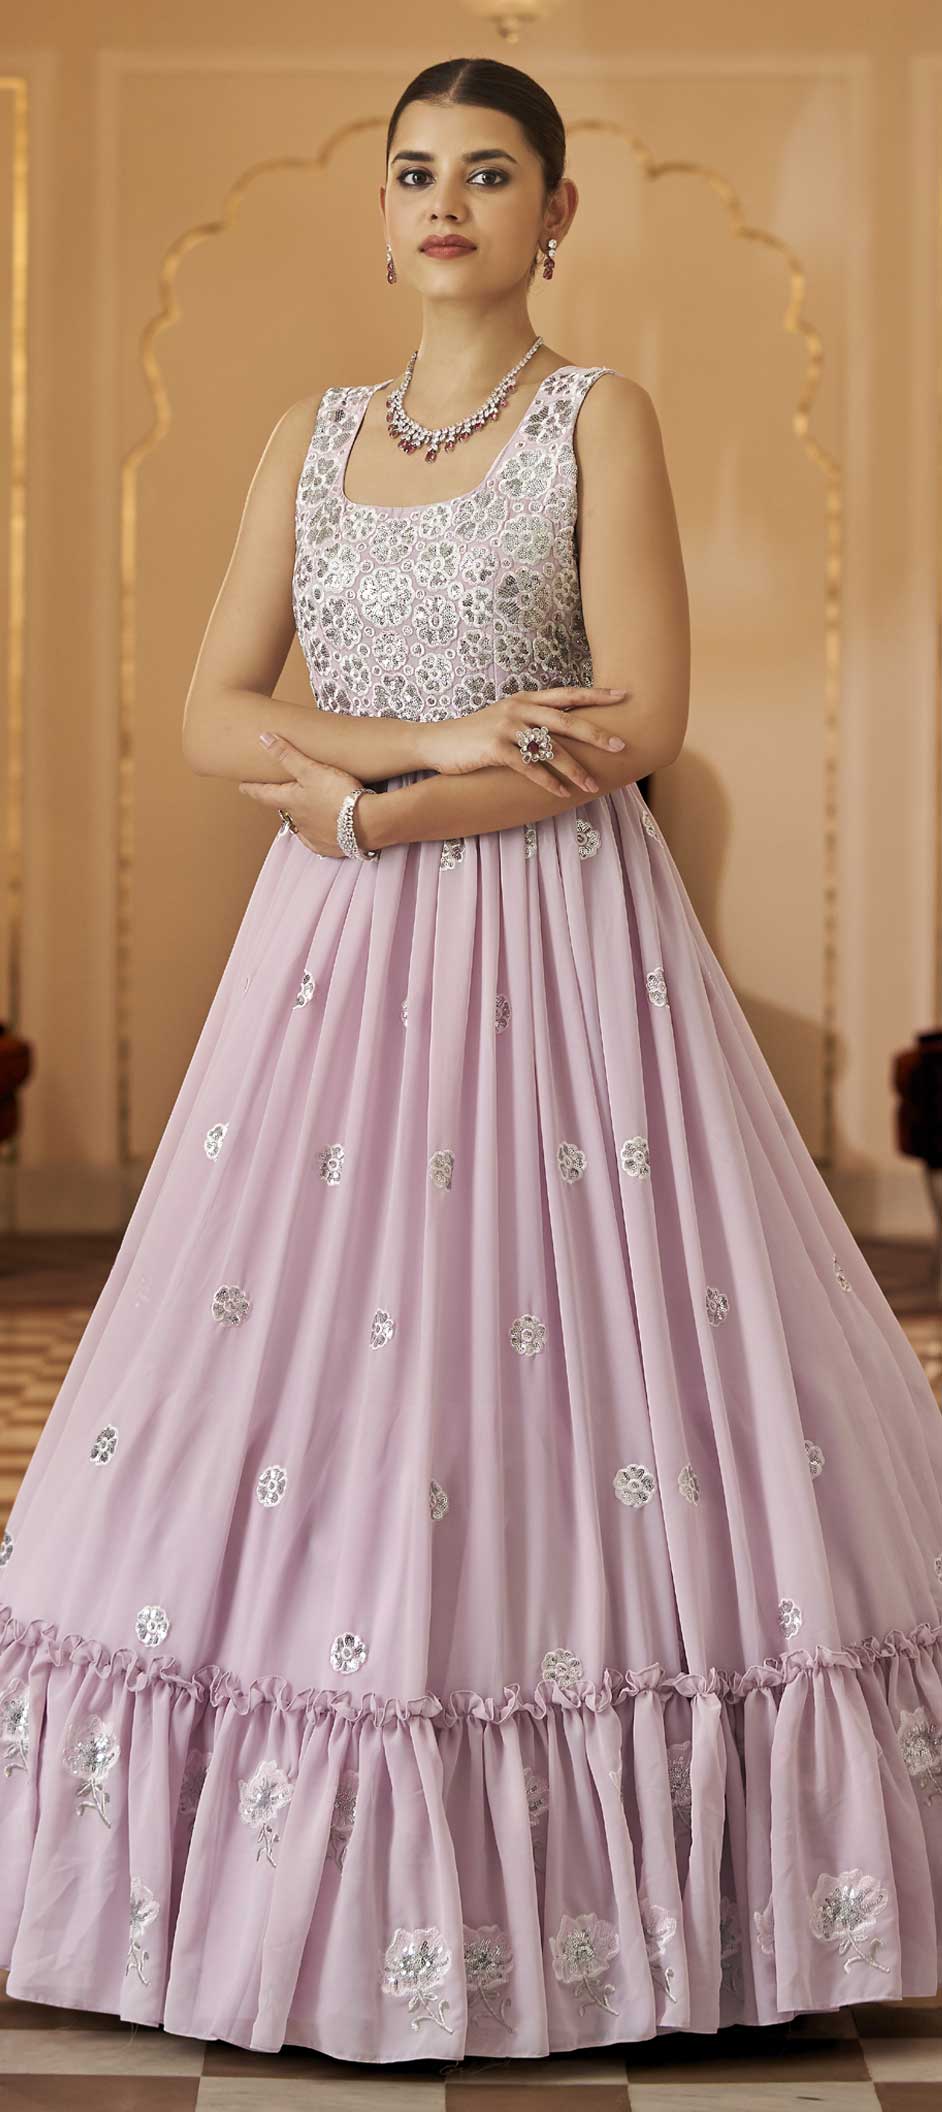 Stunning Outfit Ideas for Attending an Indian Wedding